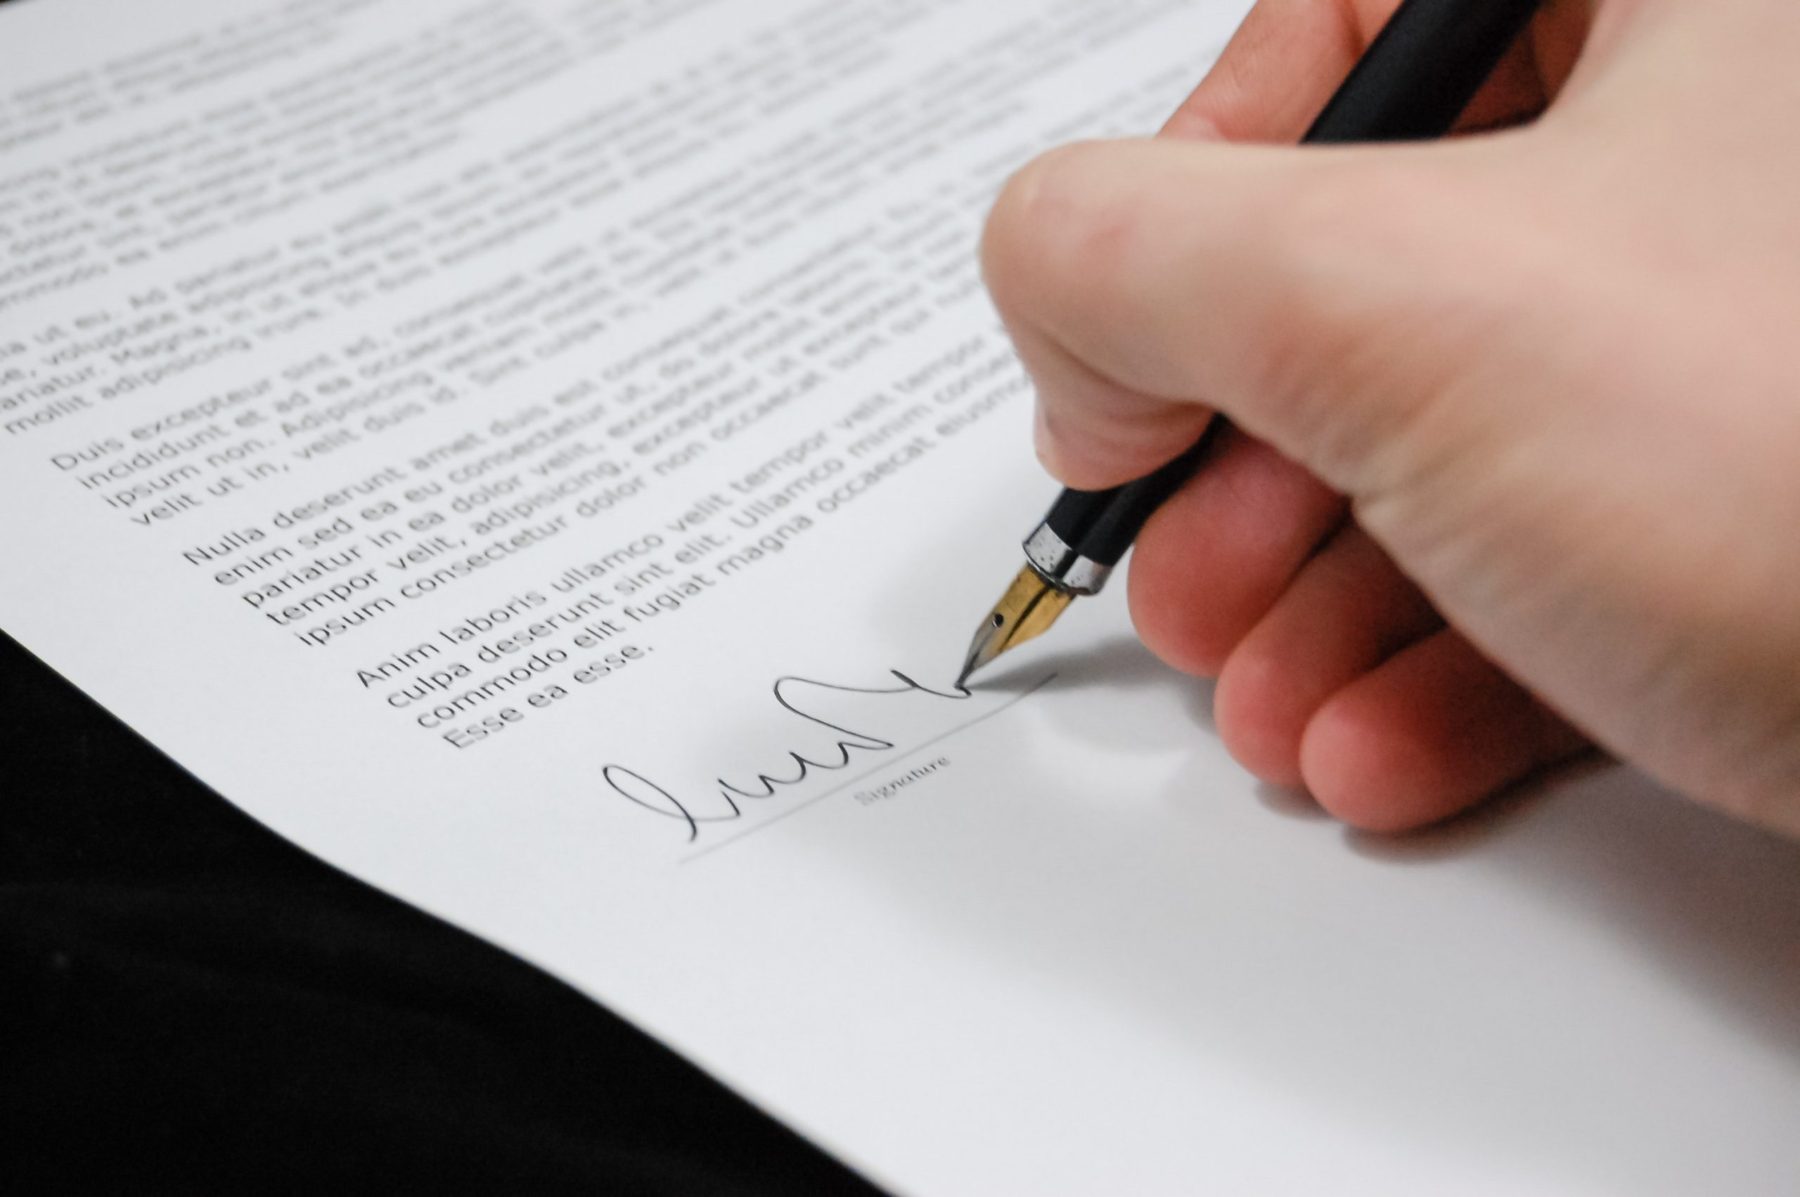 A person's hand signing a business document at the bottom of the page.